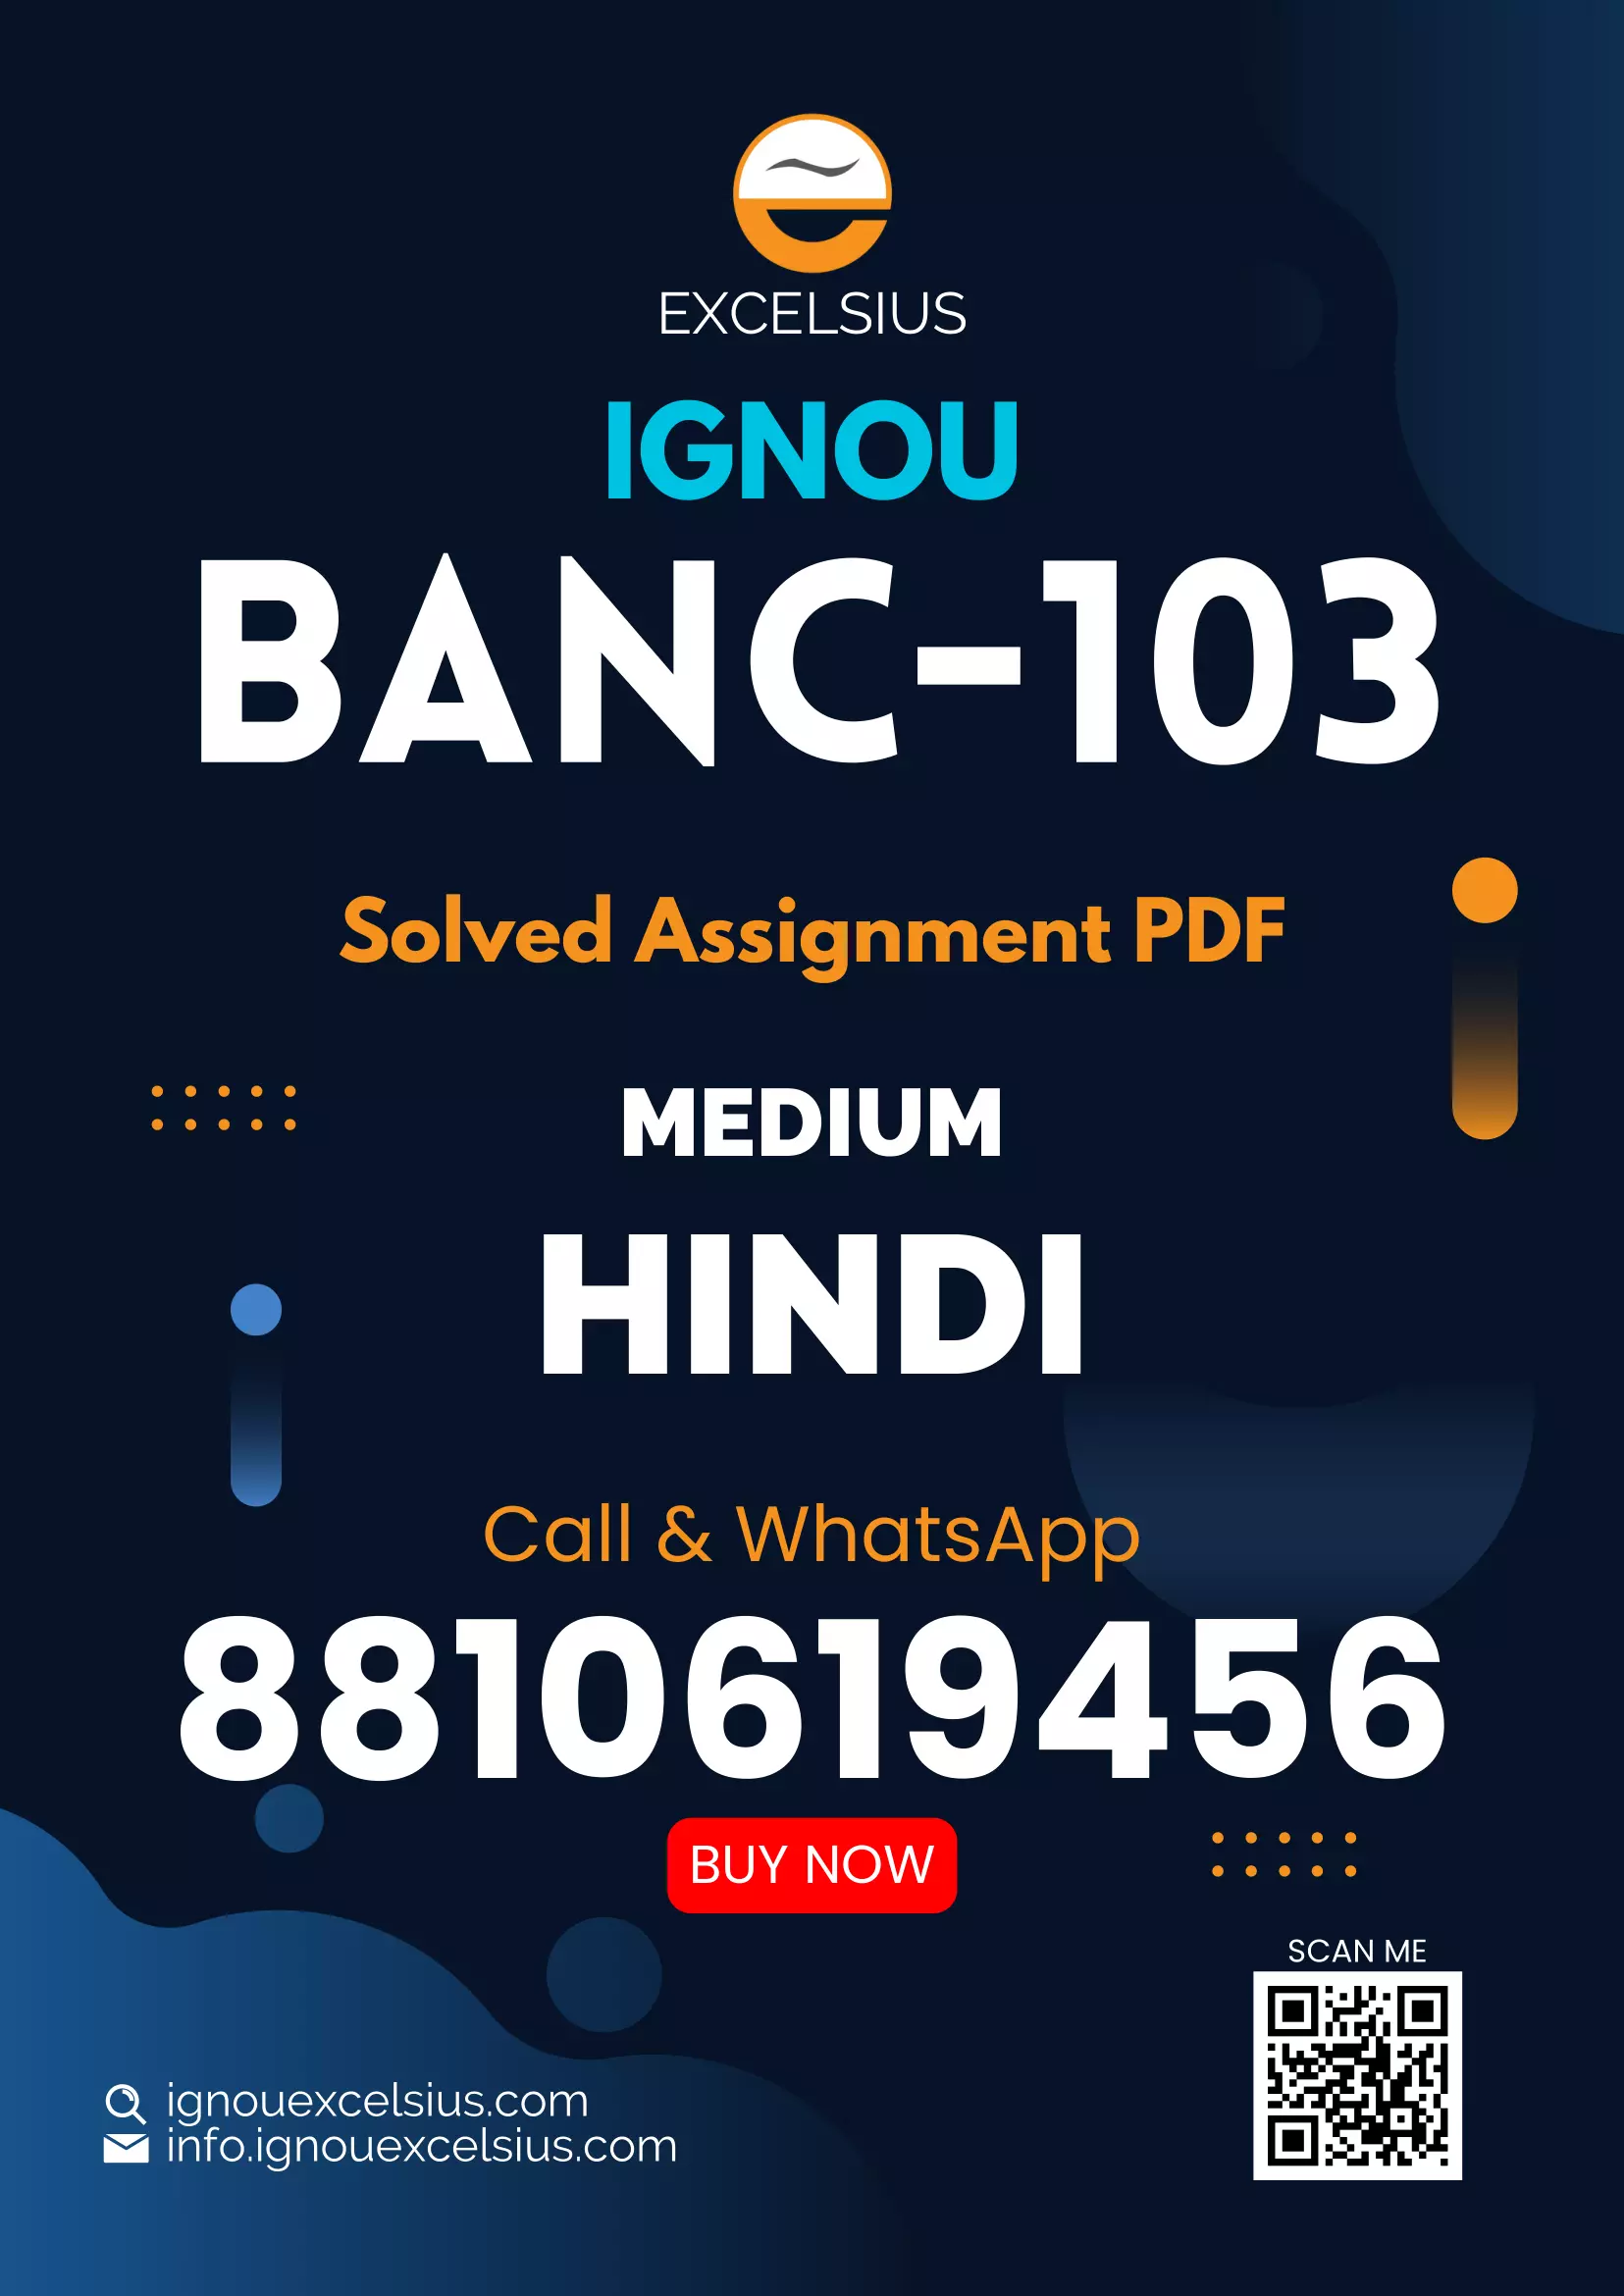 IGNOU BANC-103 - Archaeological Anthropology, Latest Solved Assignment-July 2022 – January 2023